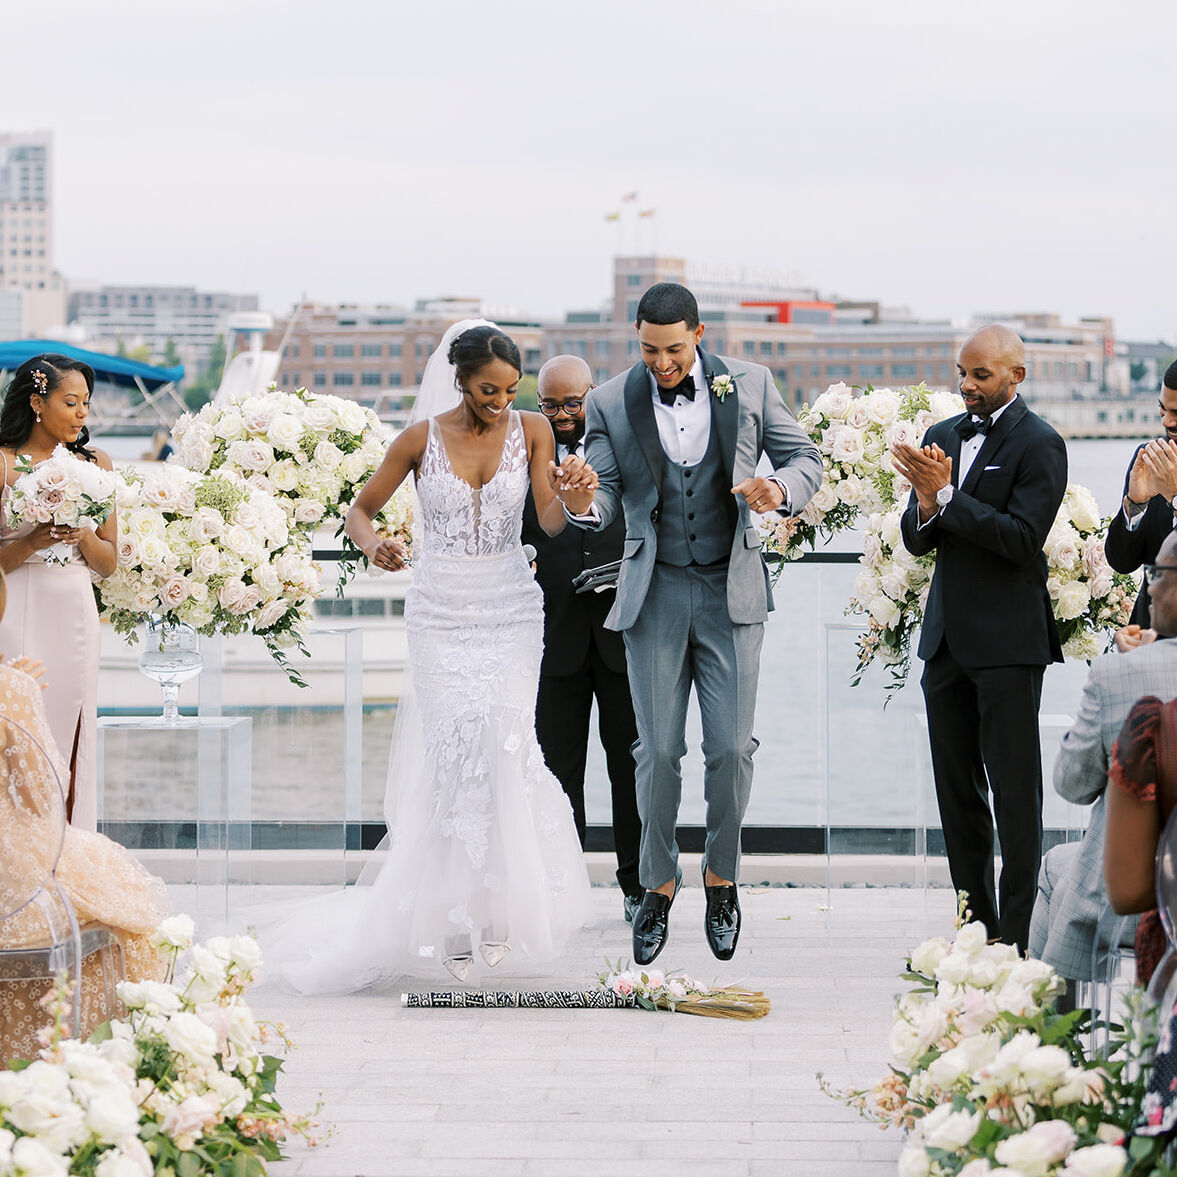 Jumping the Broom (African American tradition)